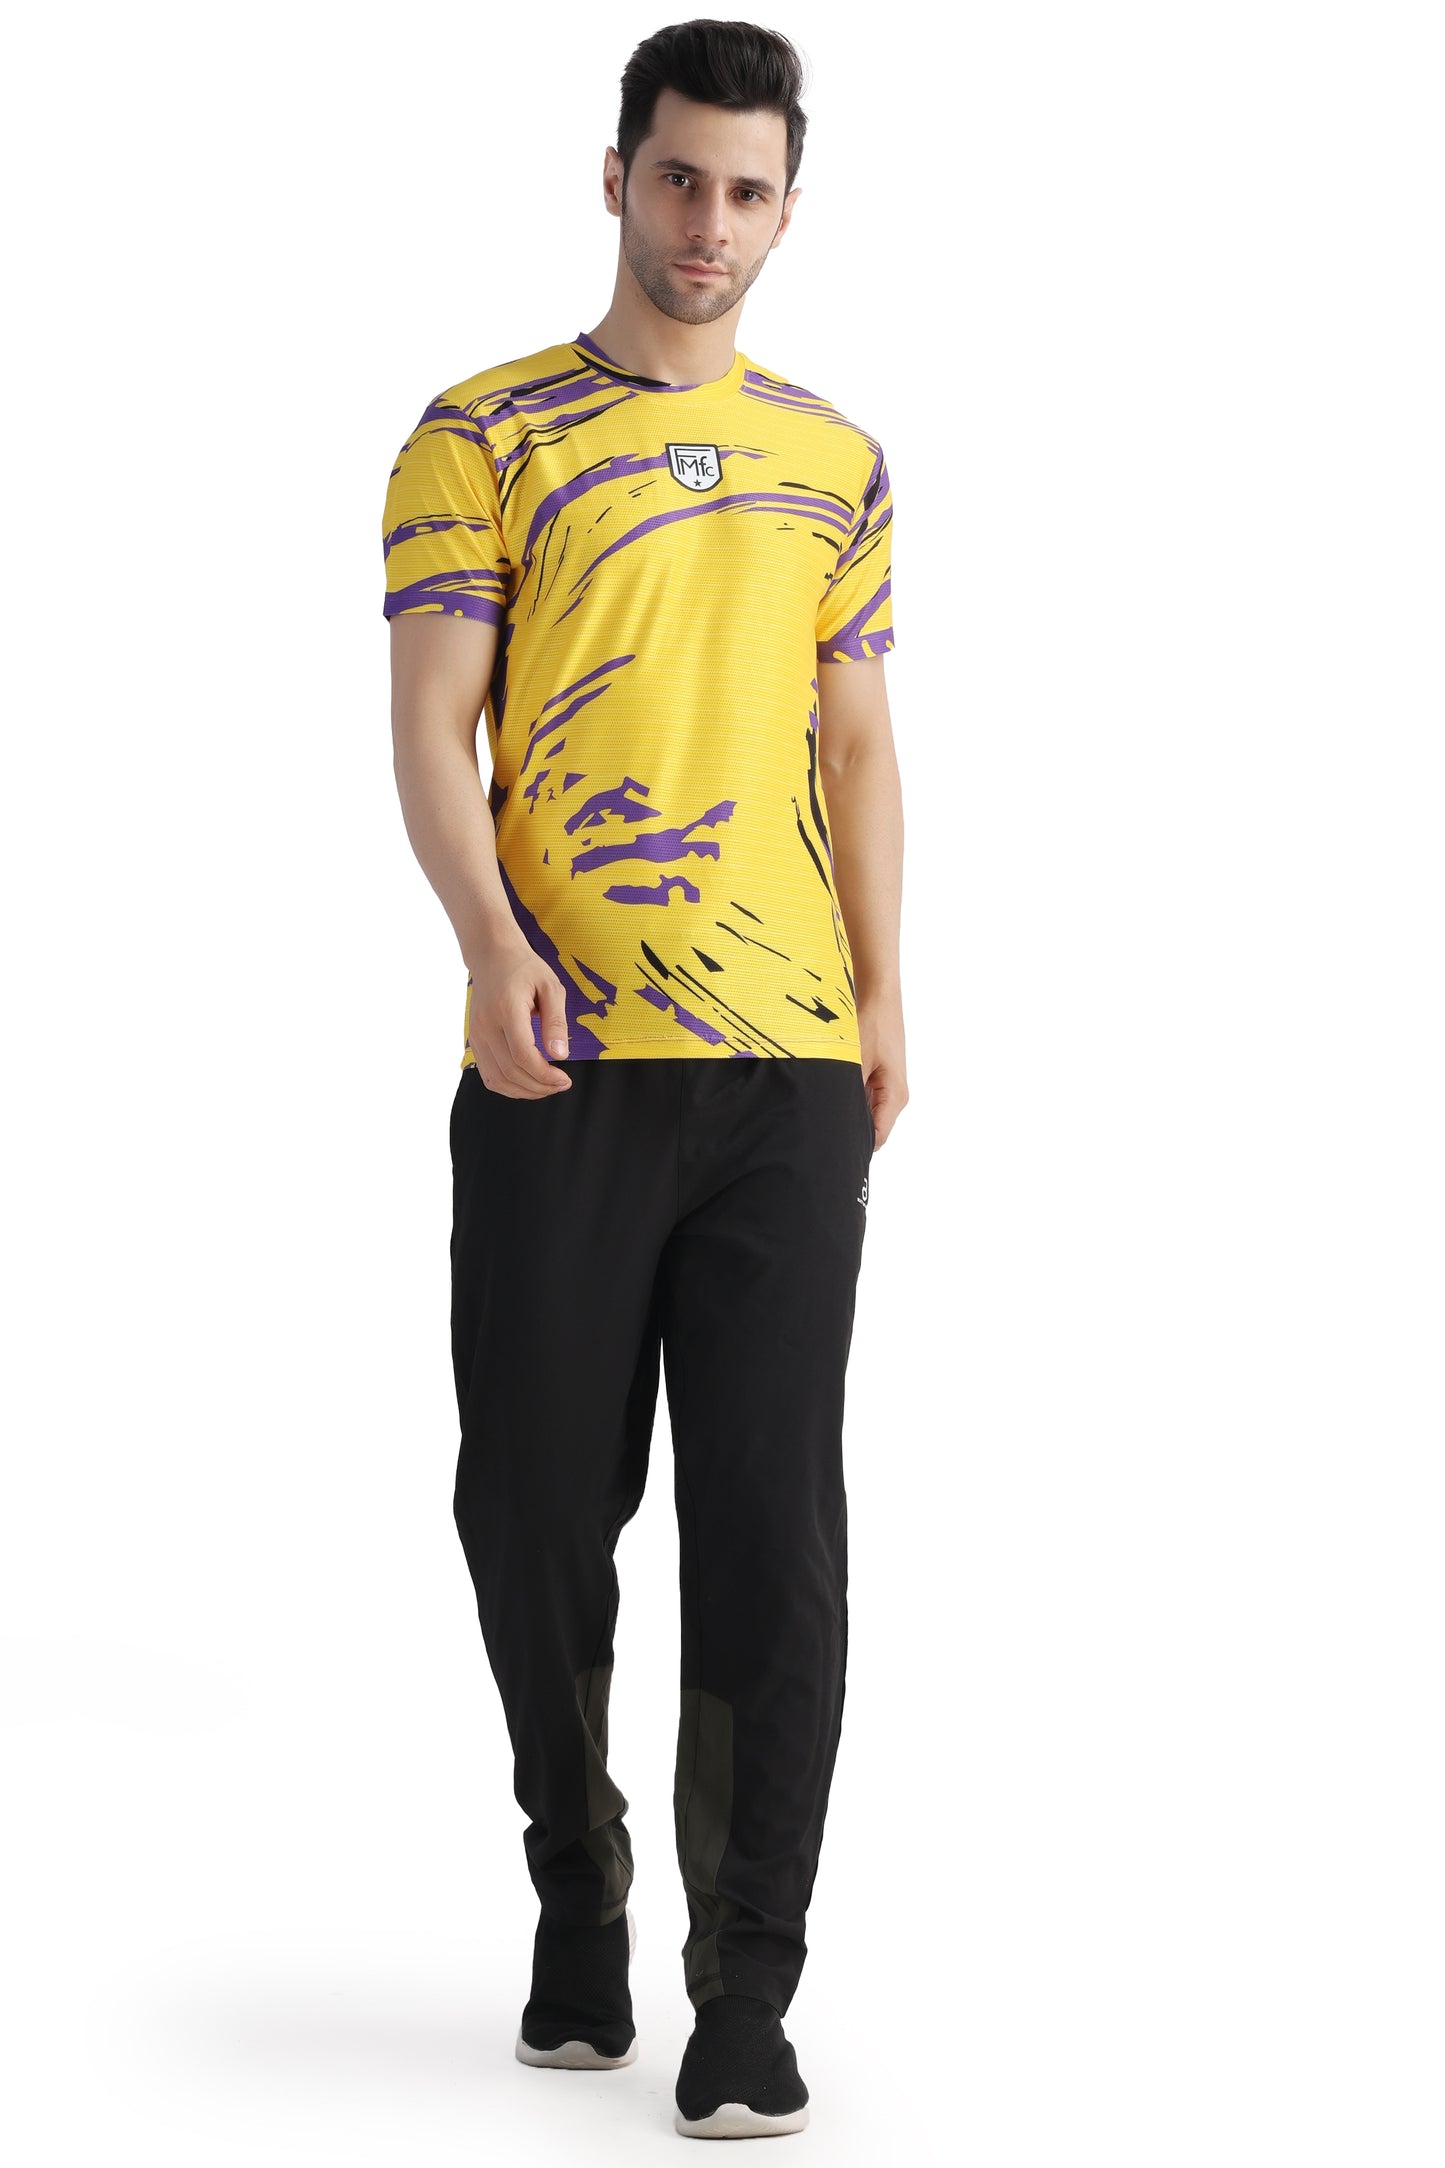 Unisex Customised Sports Jersey - Bumble Bee